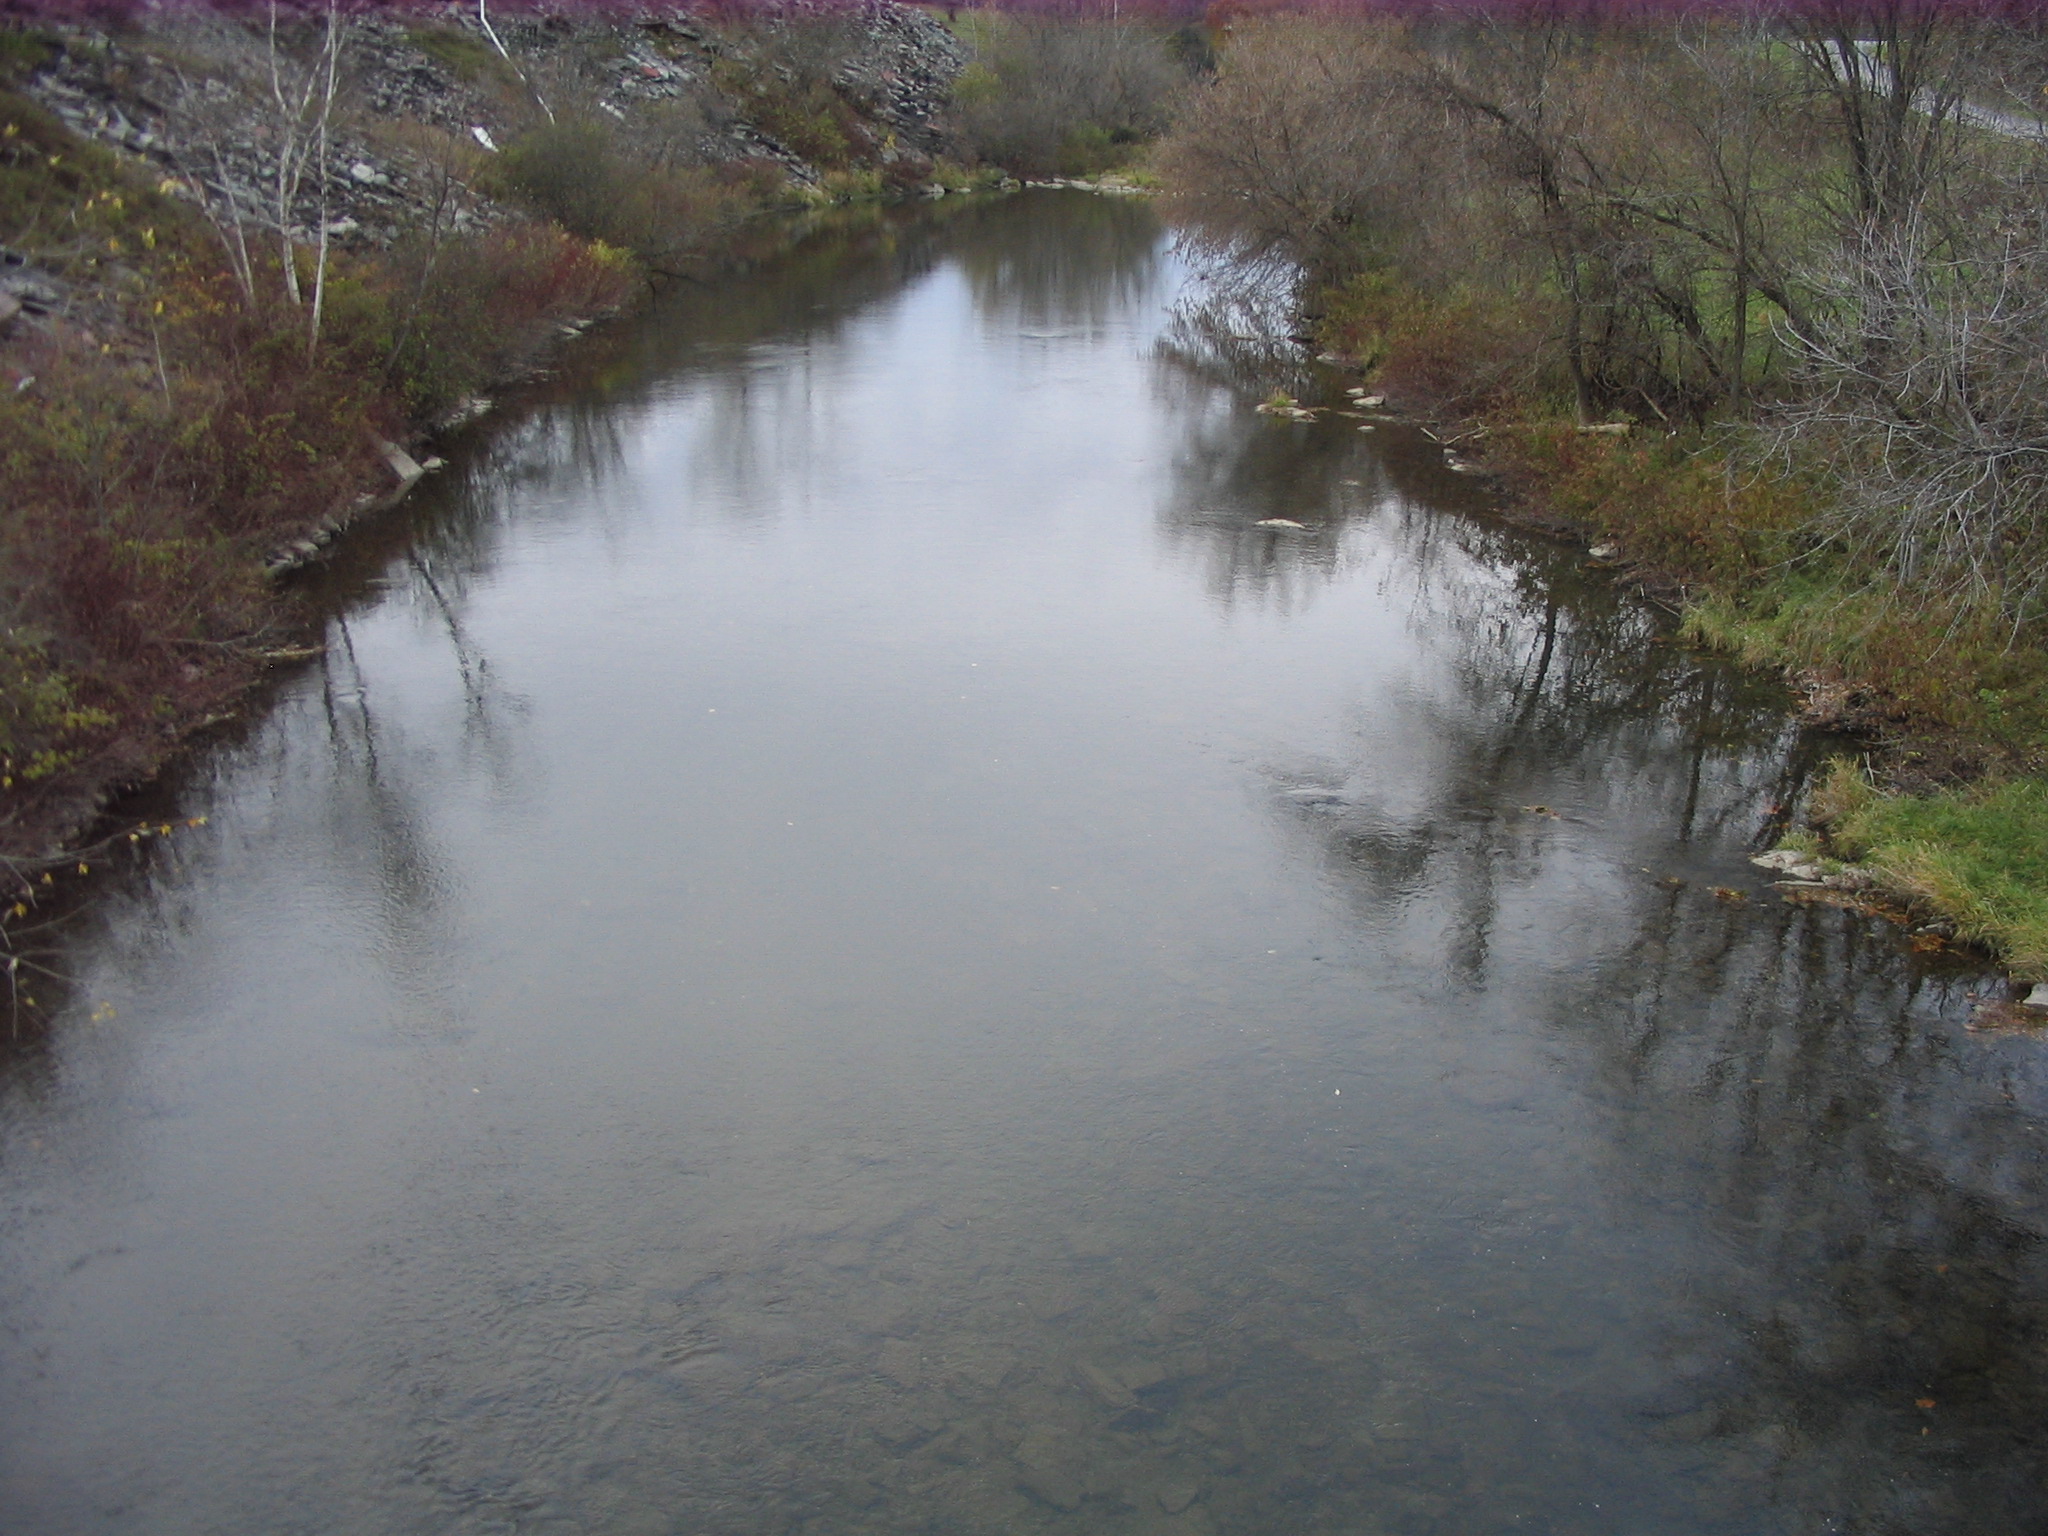 Photograph of the Mettawee River at Granville, NY (GVVN6) looking downstream